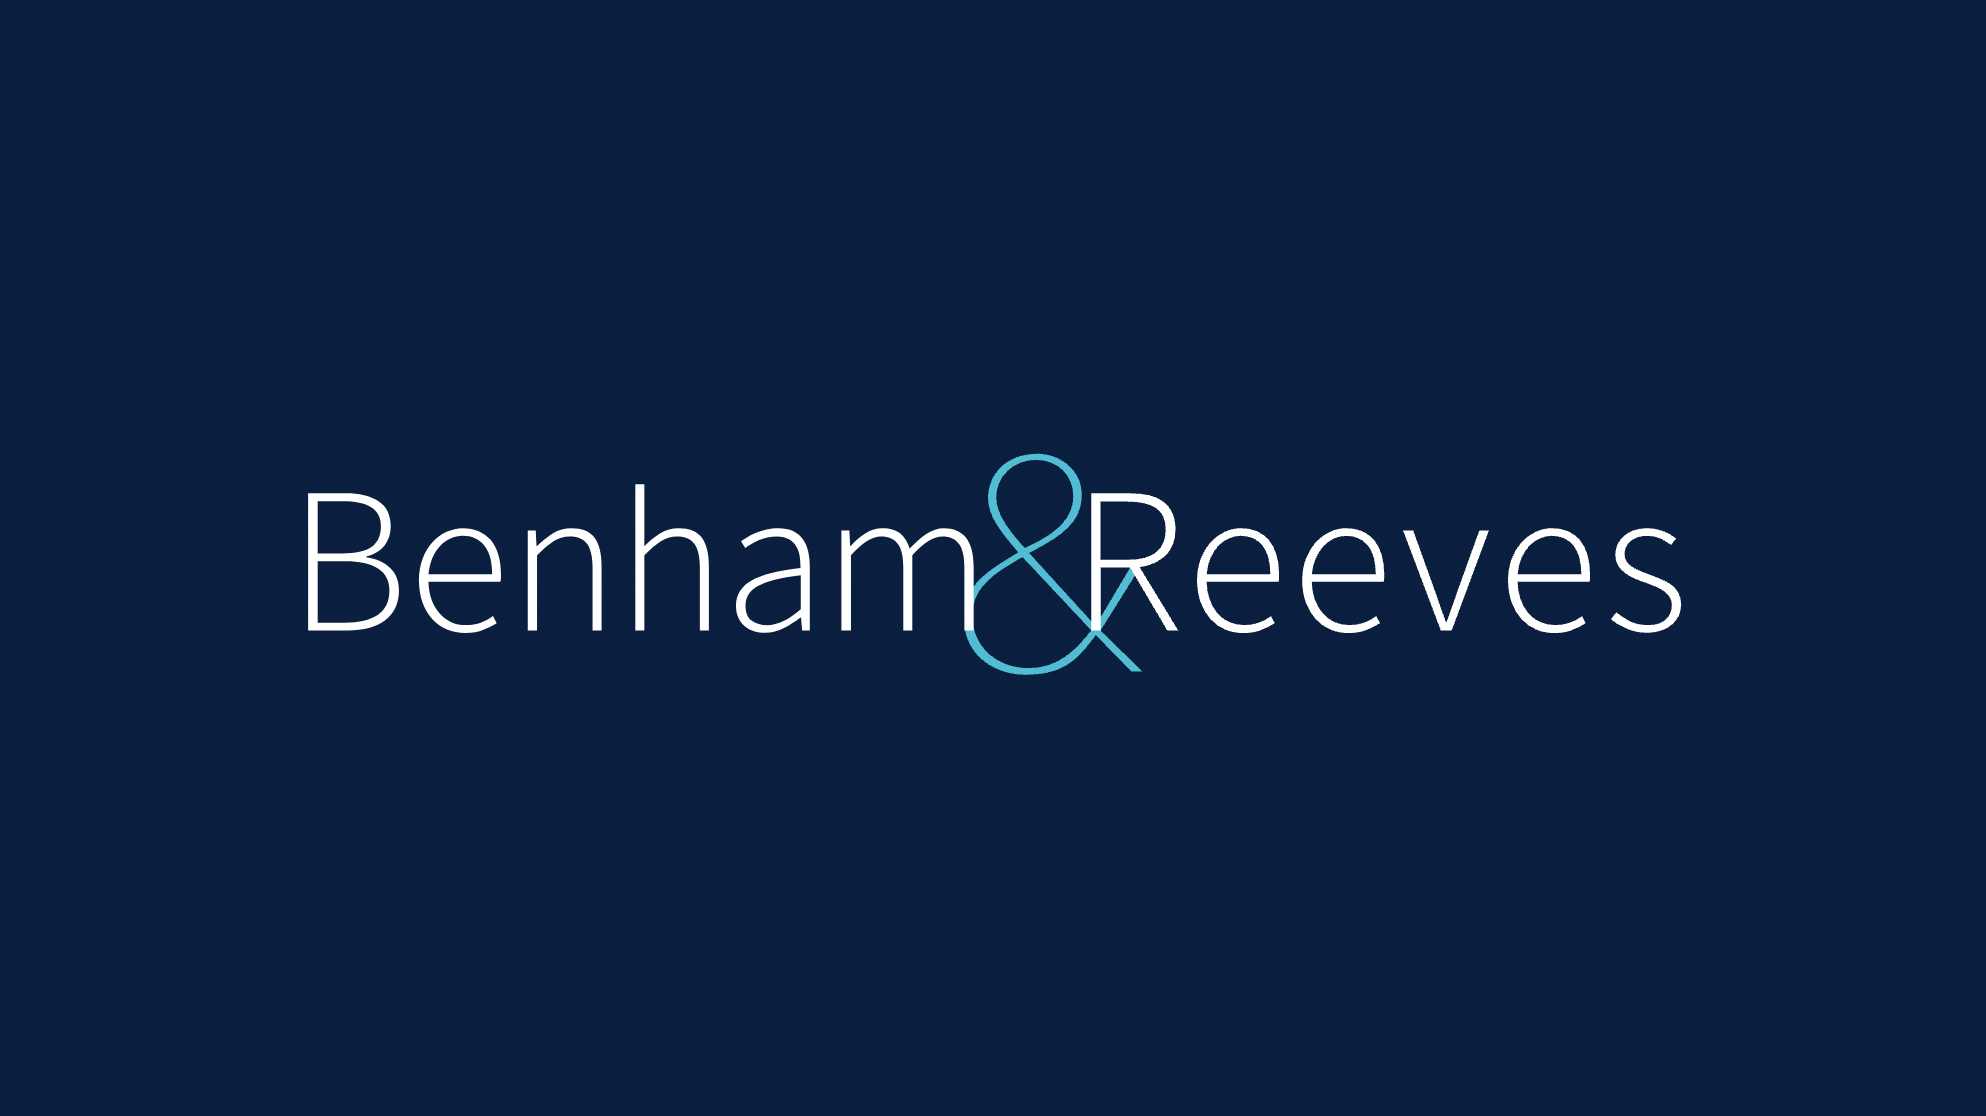 Benham & Reeves Bow Green Property Exhibition